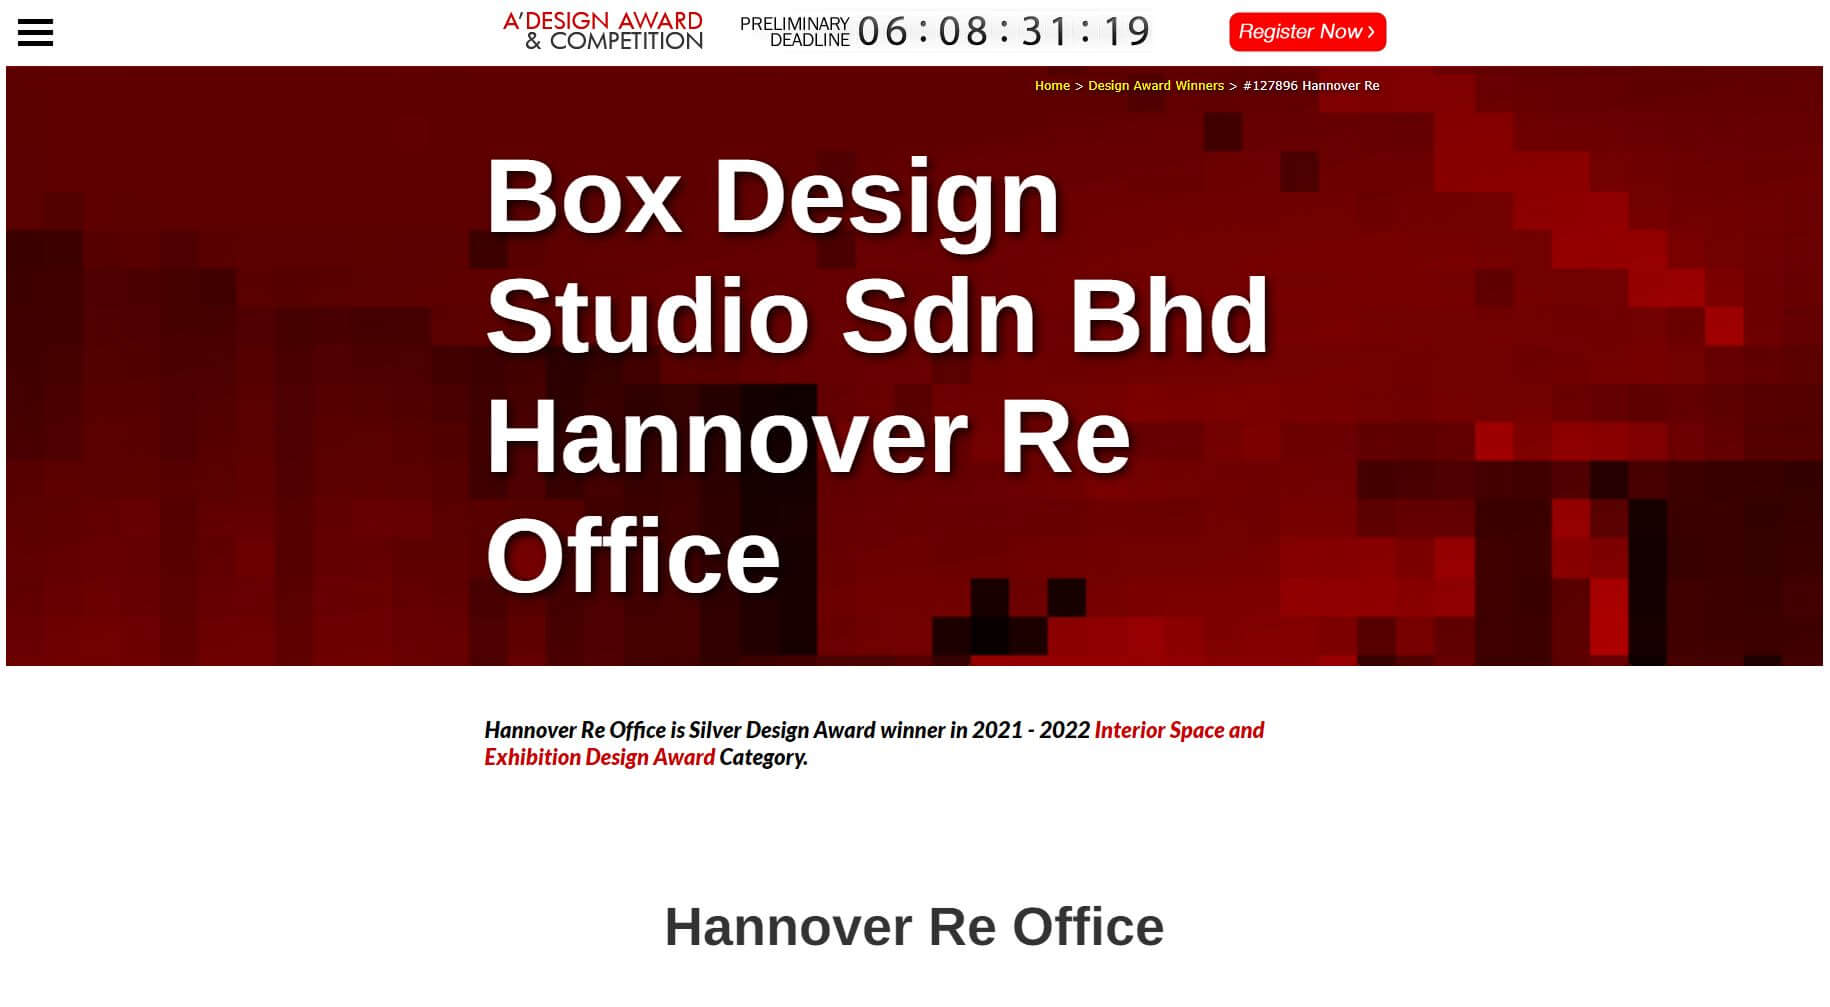 Box Design Studio Sdn Bhd Hannover Re Office, 16 May 2022